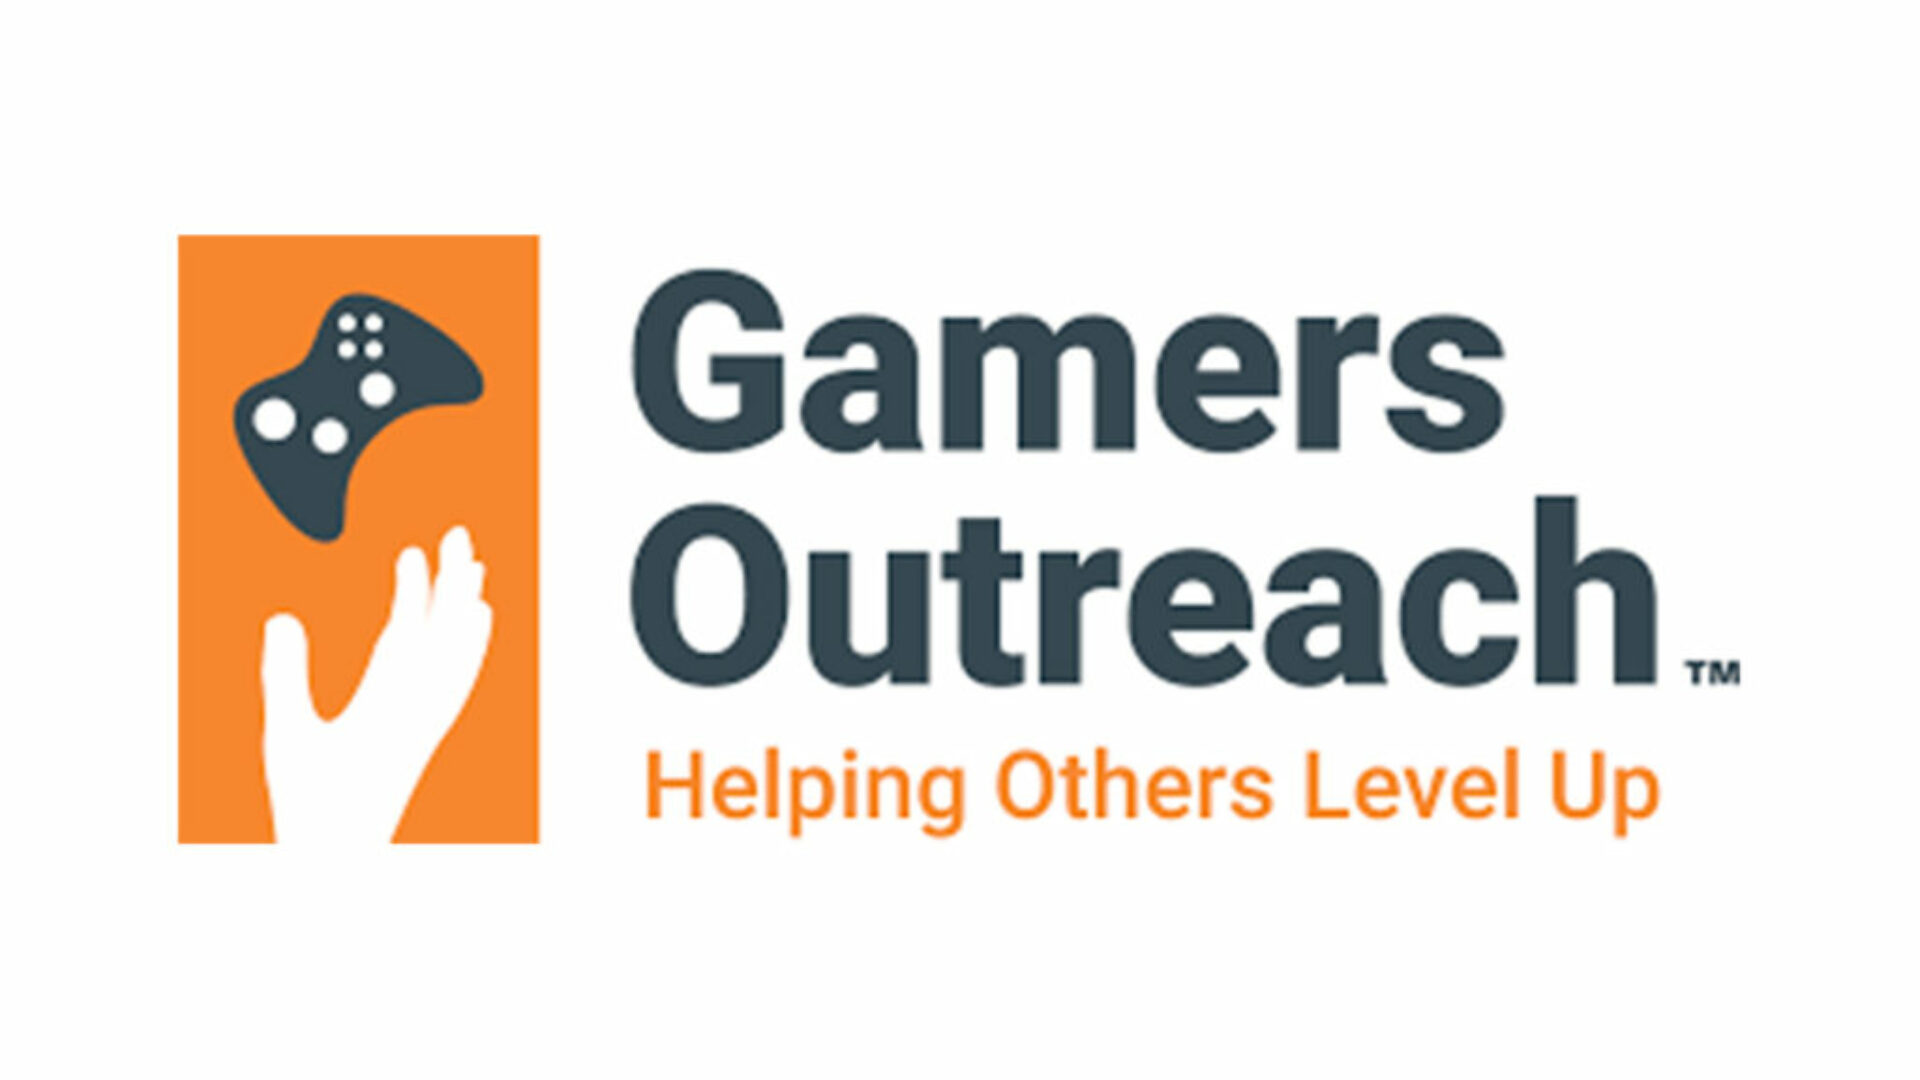 Charities 16x9 - Gamers Outreach Foundation